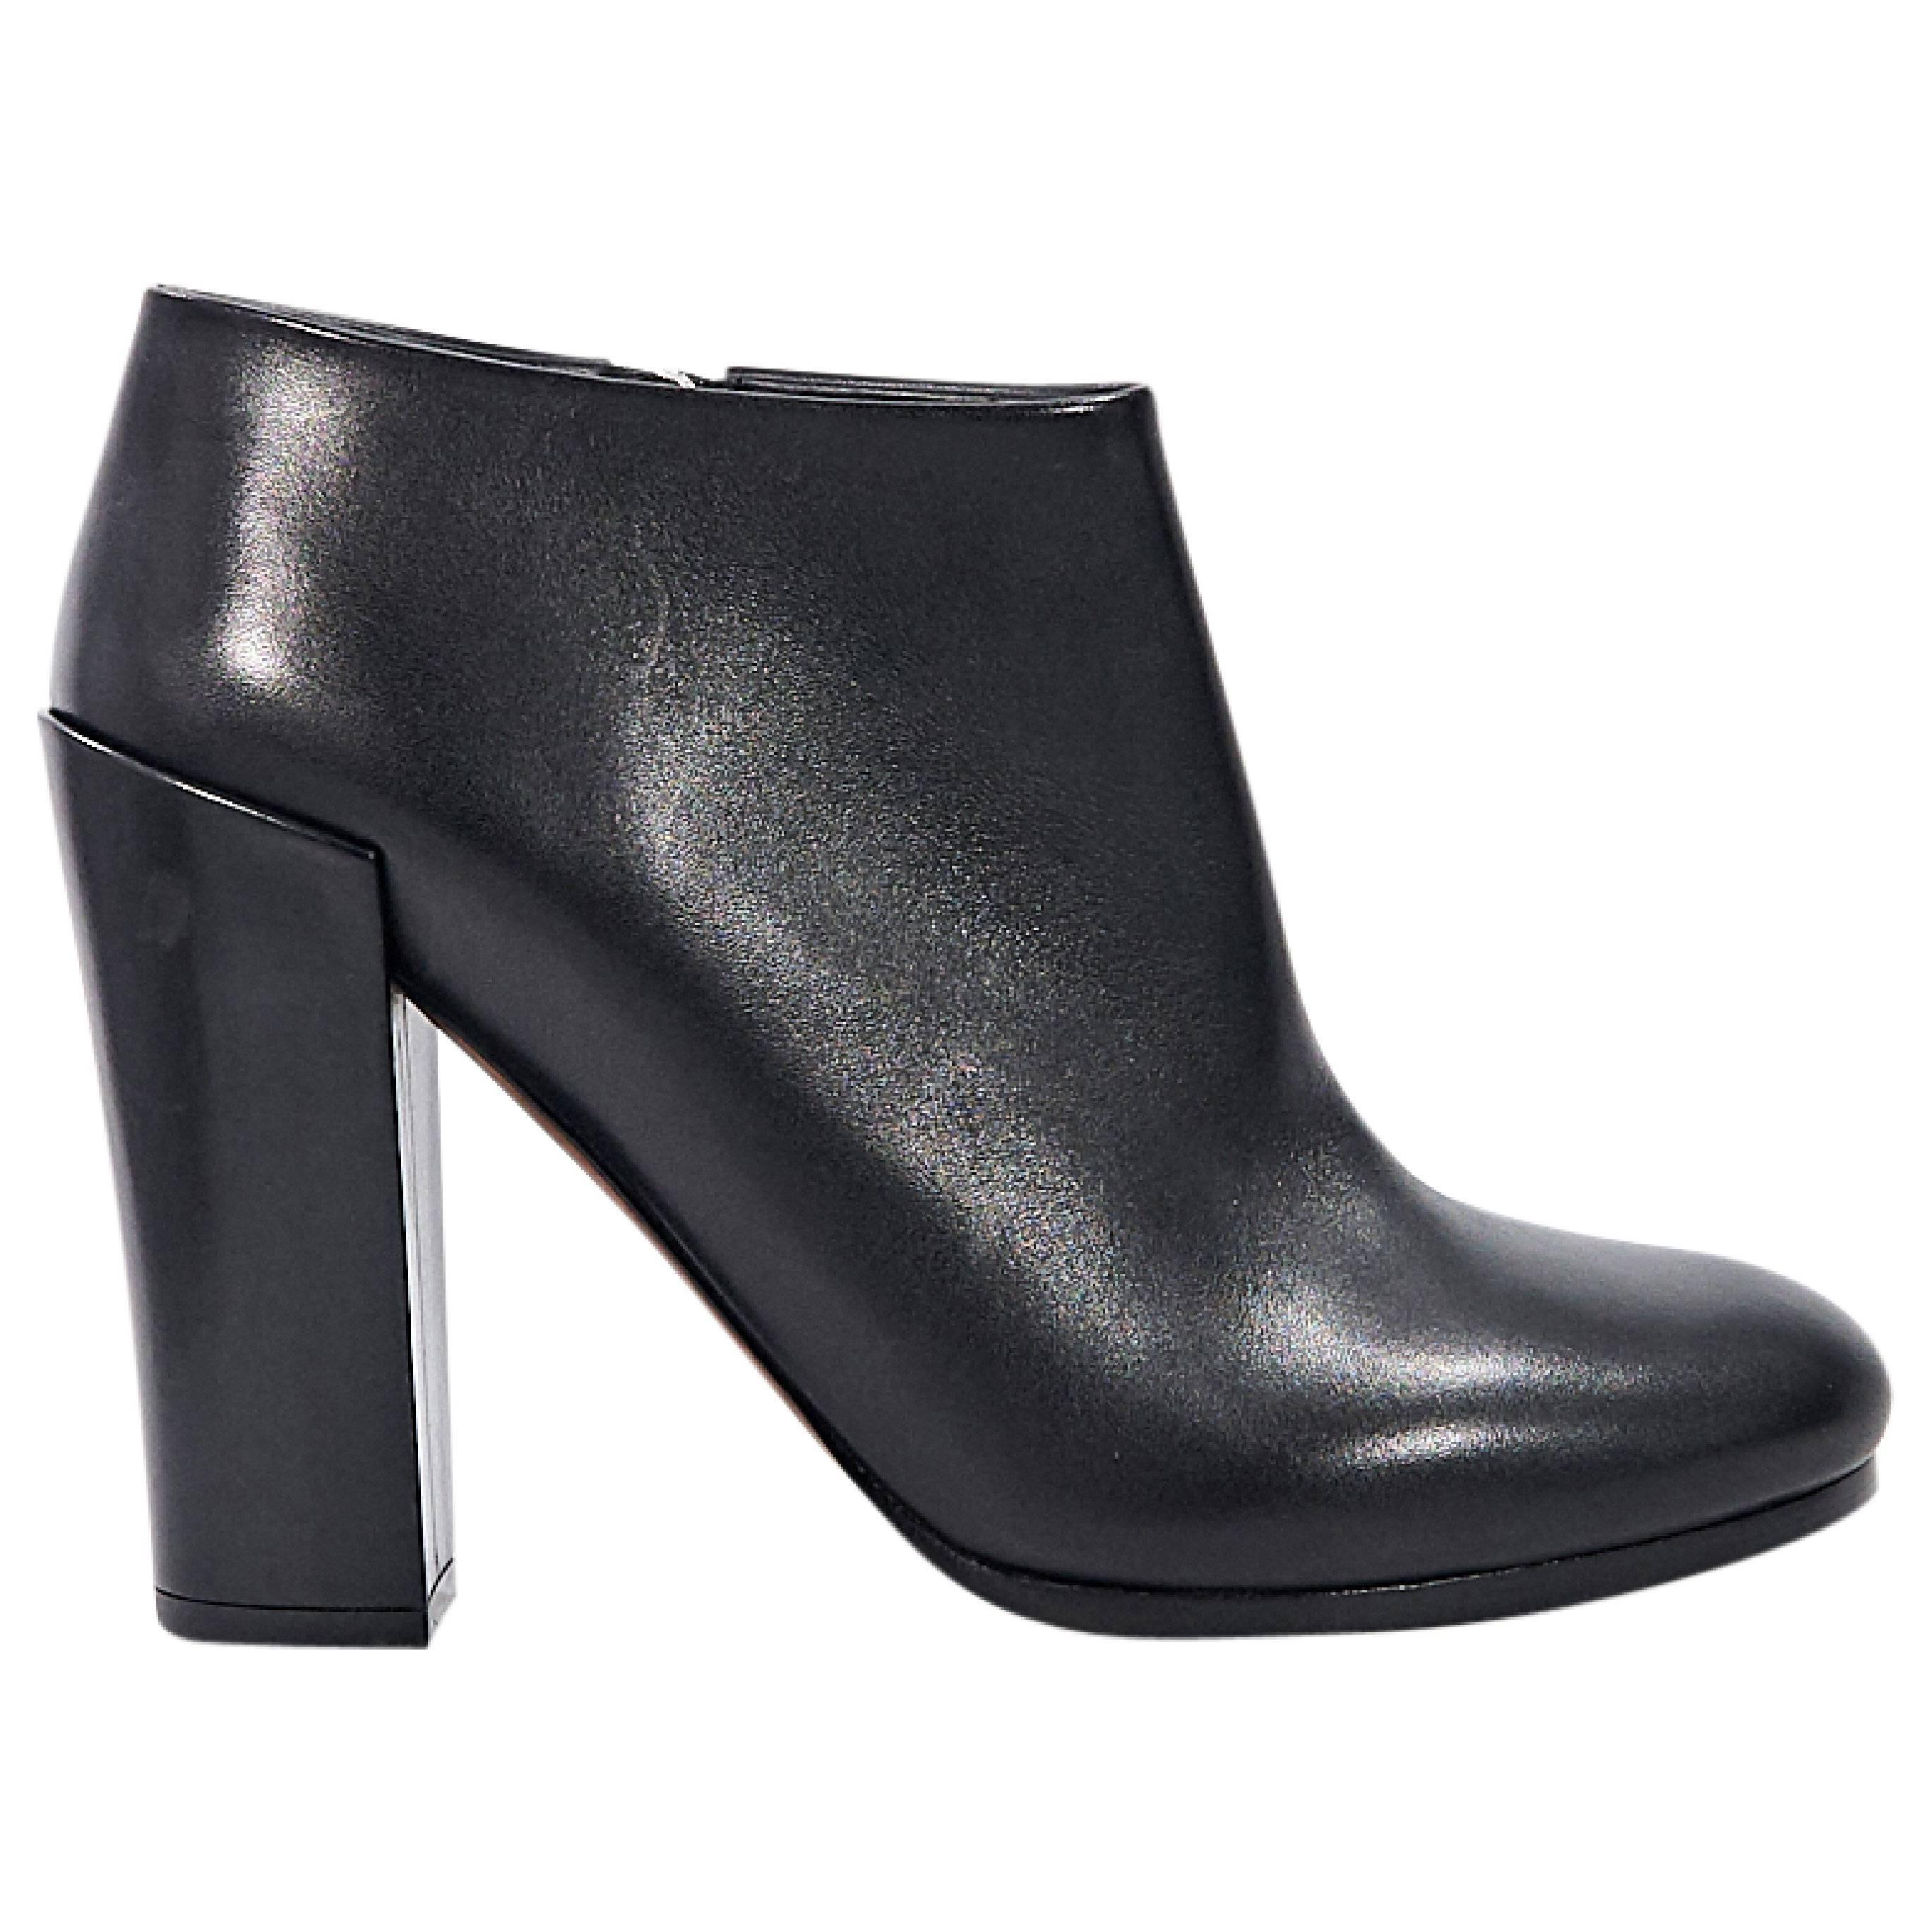 Black Proenza Schouler Leather Ankle Boots